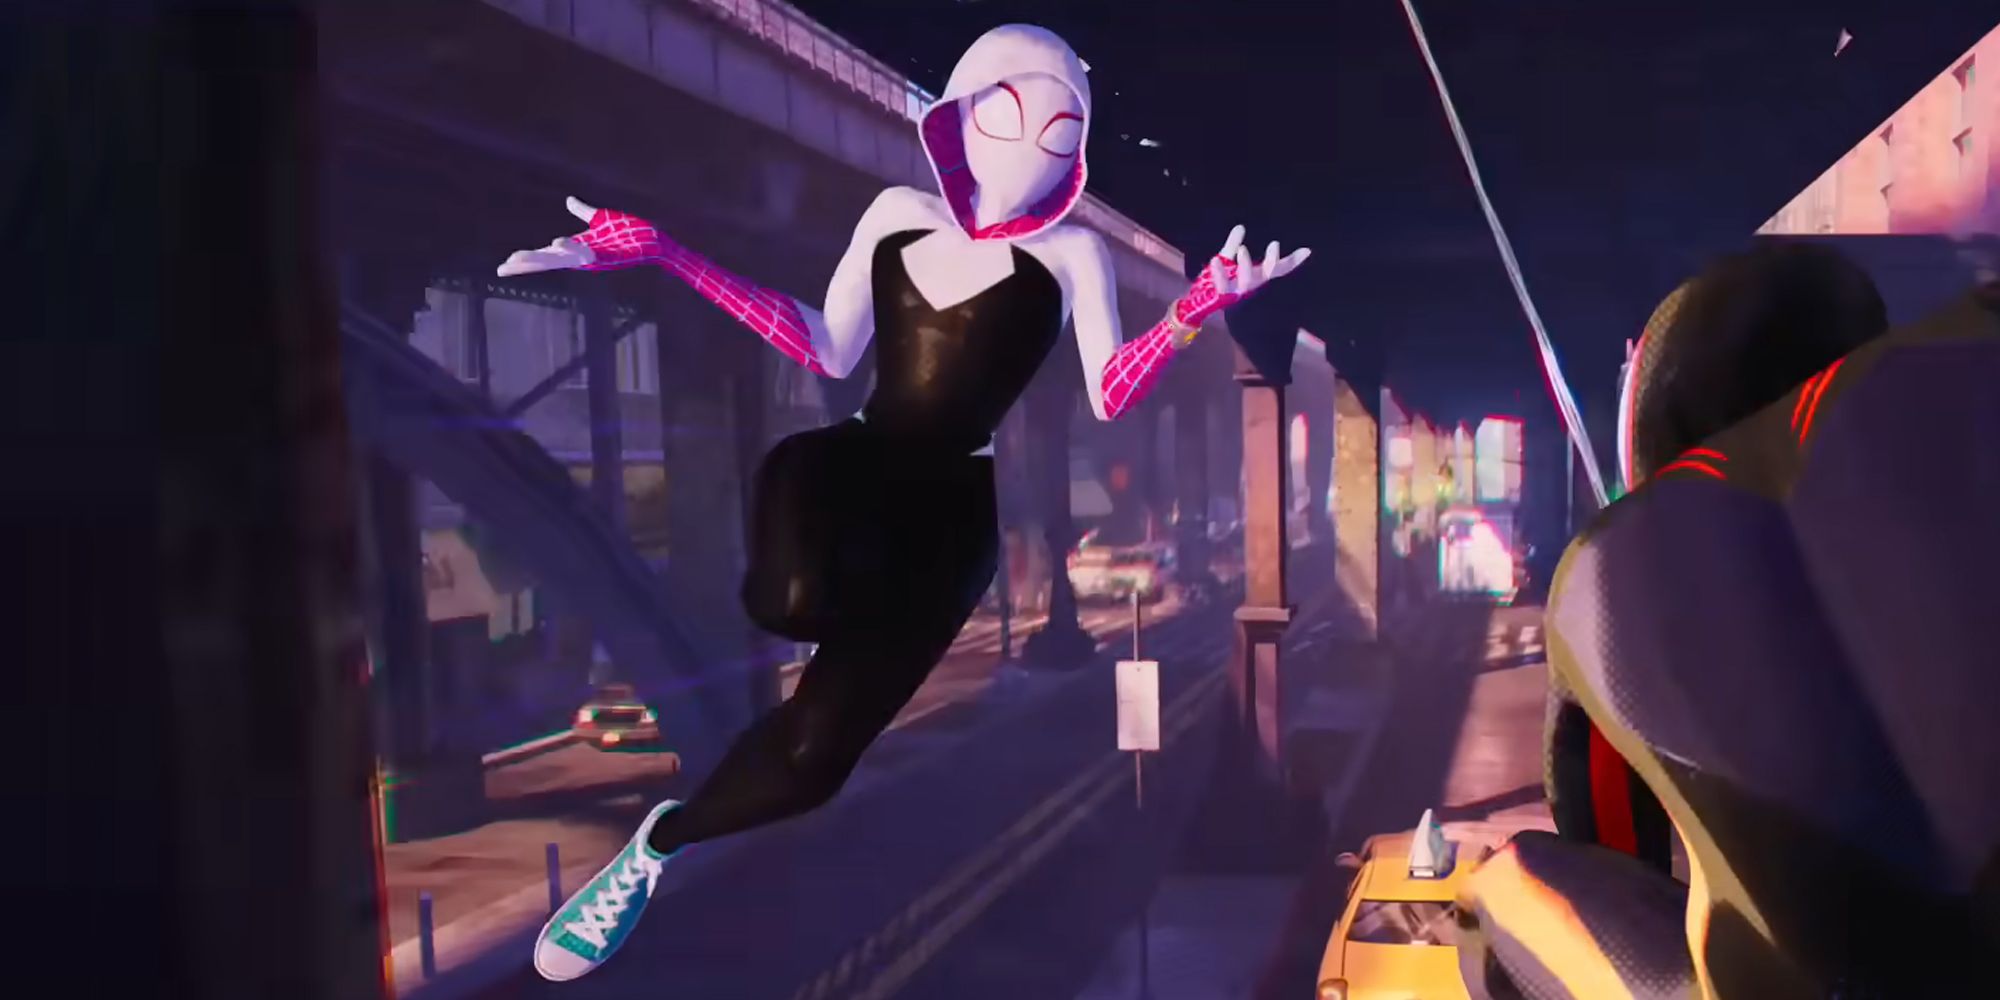 Gwen Stacy SpiderWoman from 'Spider-Man Across The Spider-Verse', she is swinging in the air shrugging her arms